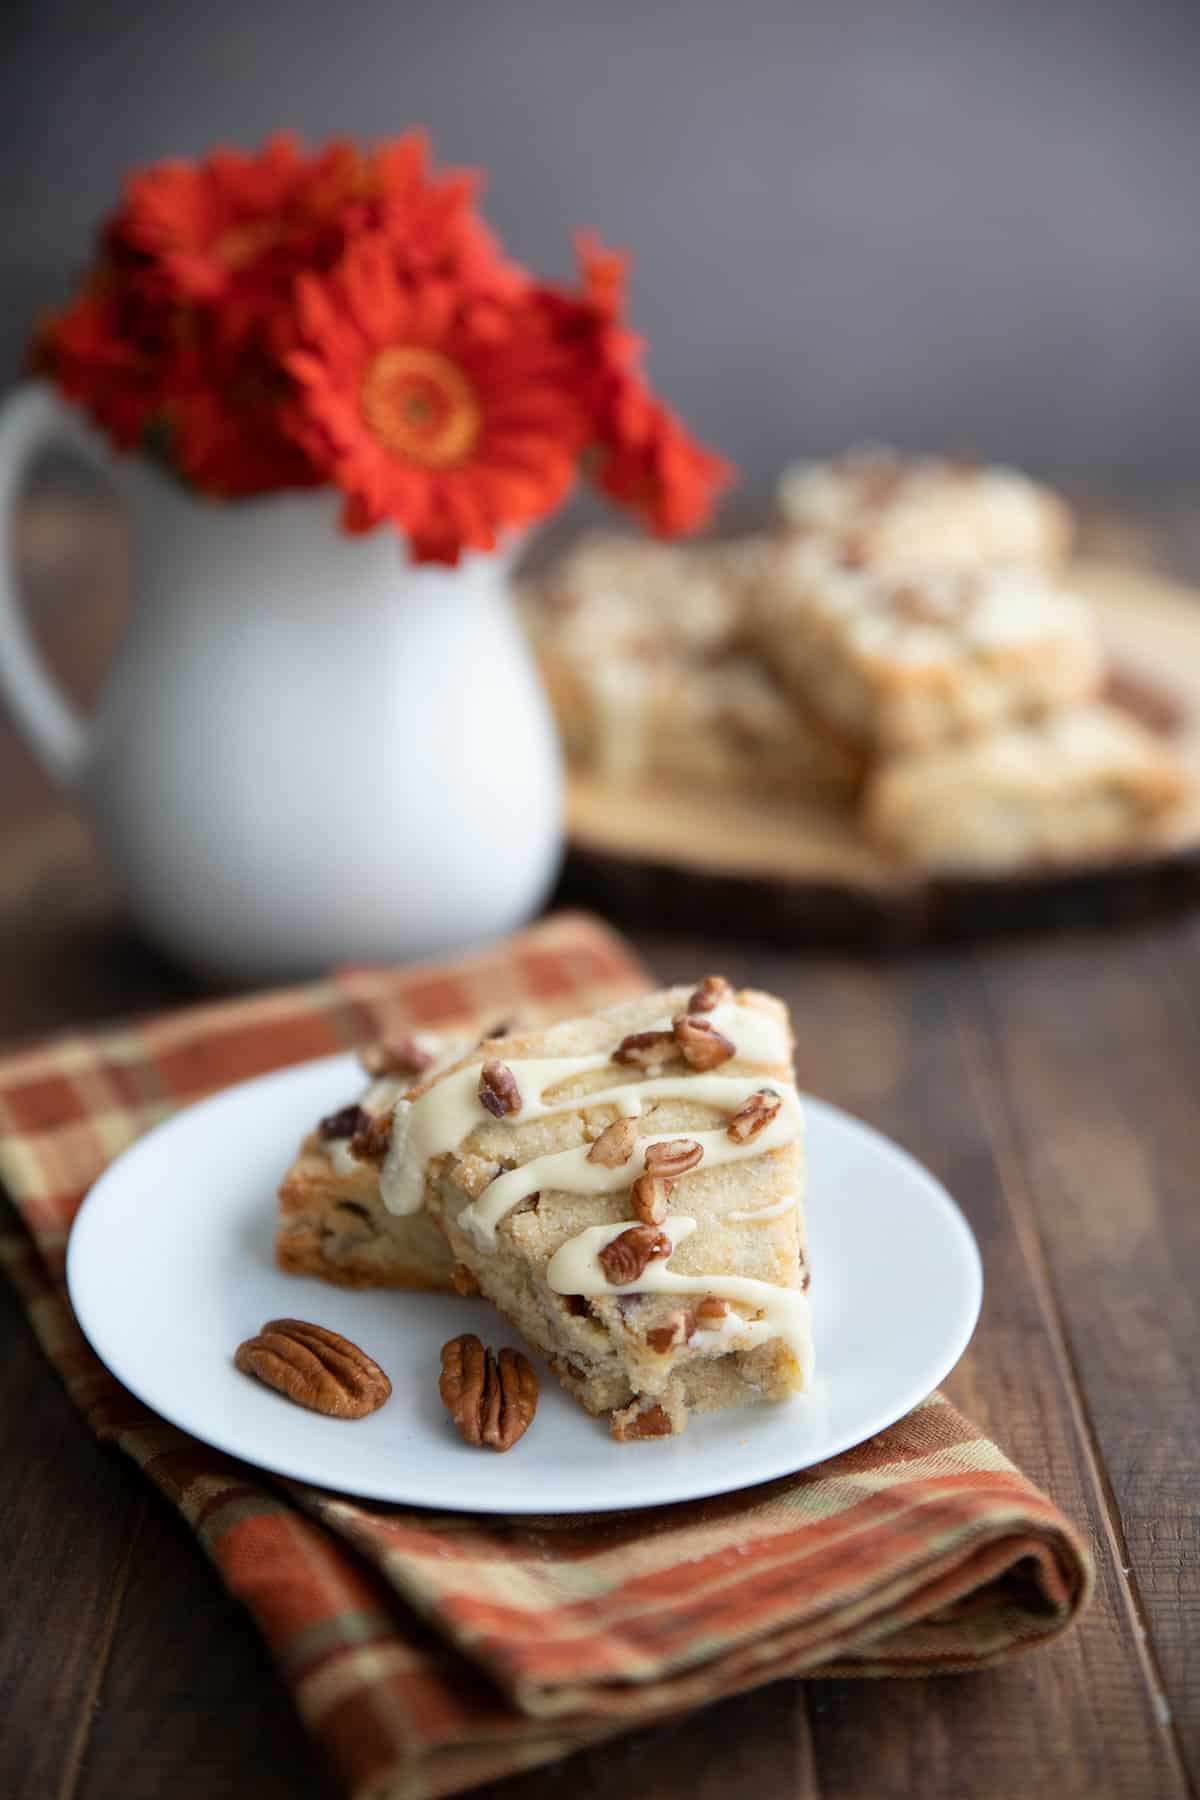 A table scene with keto maple pecan scones in front and orange flowers in a vase.